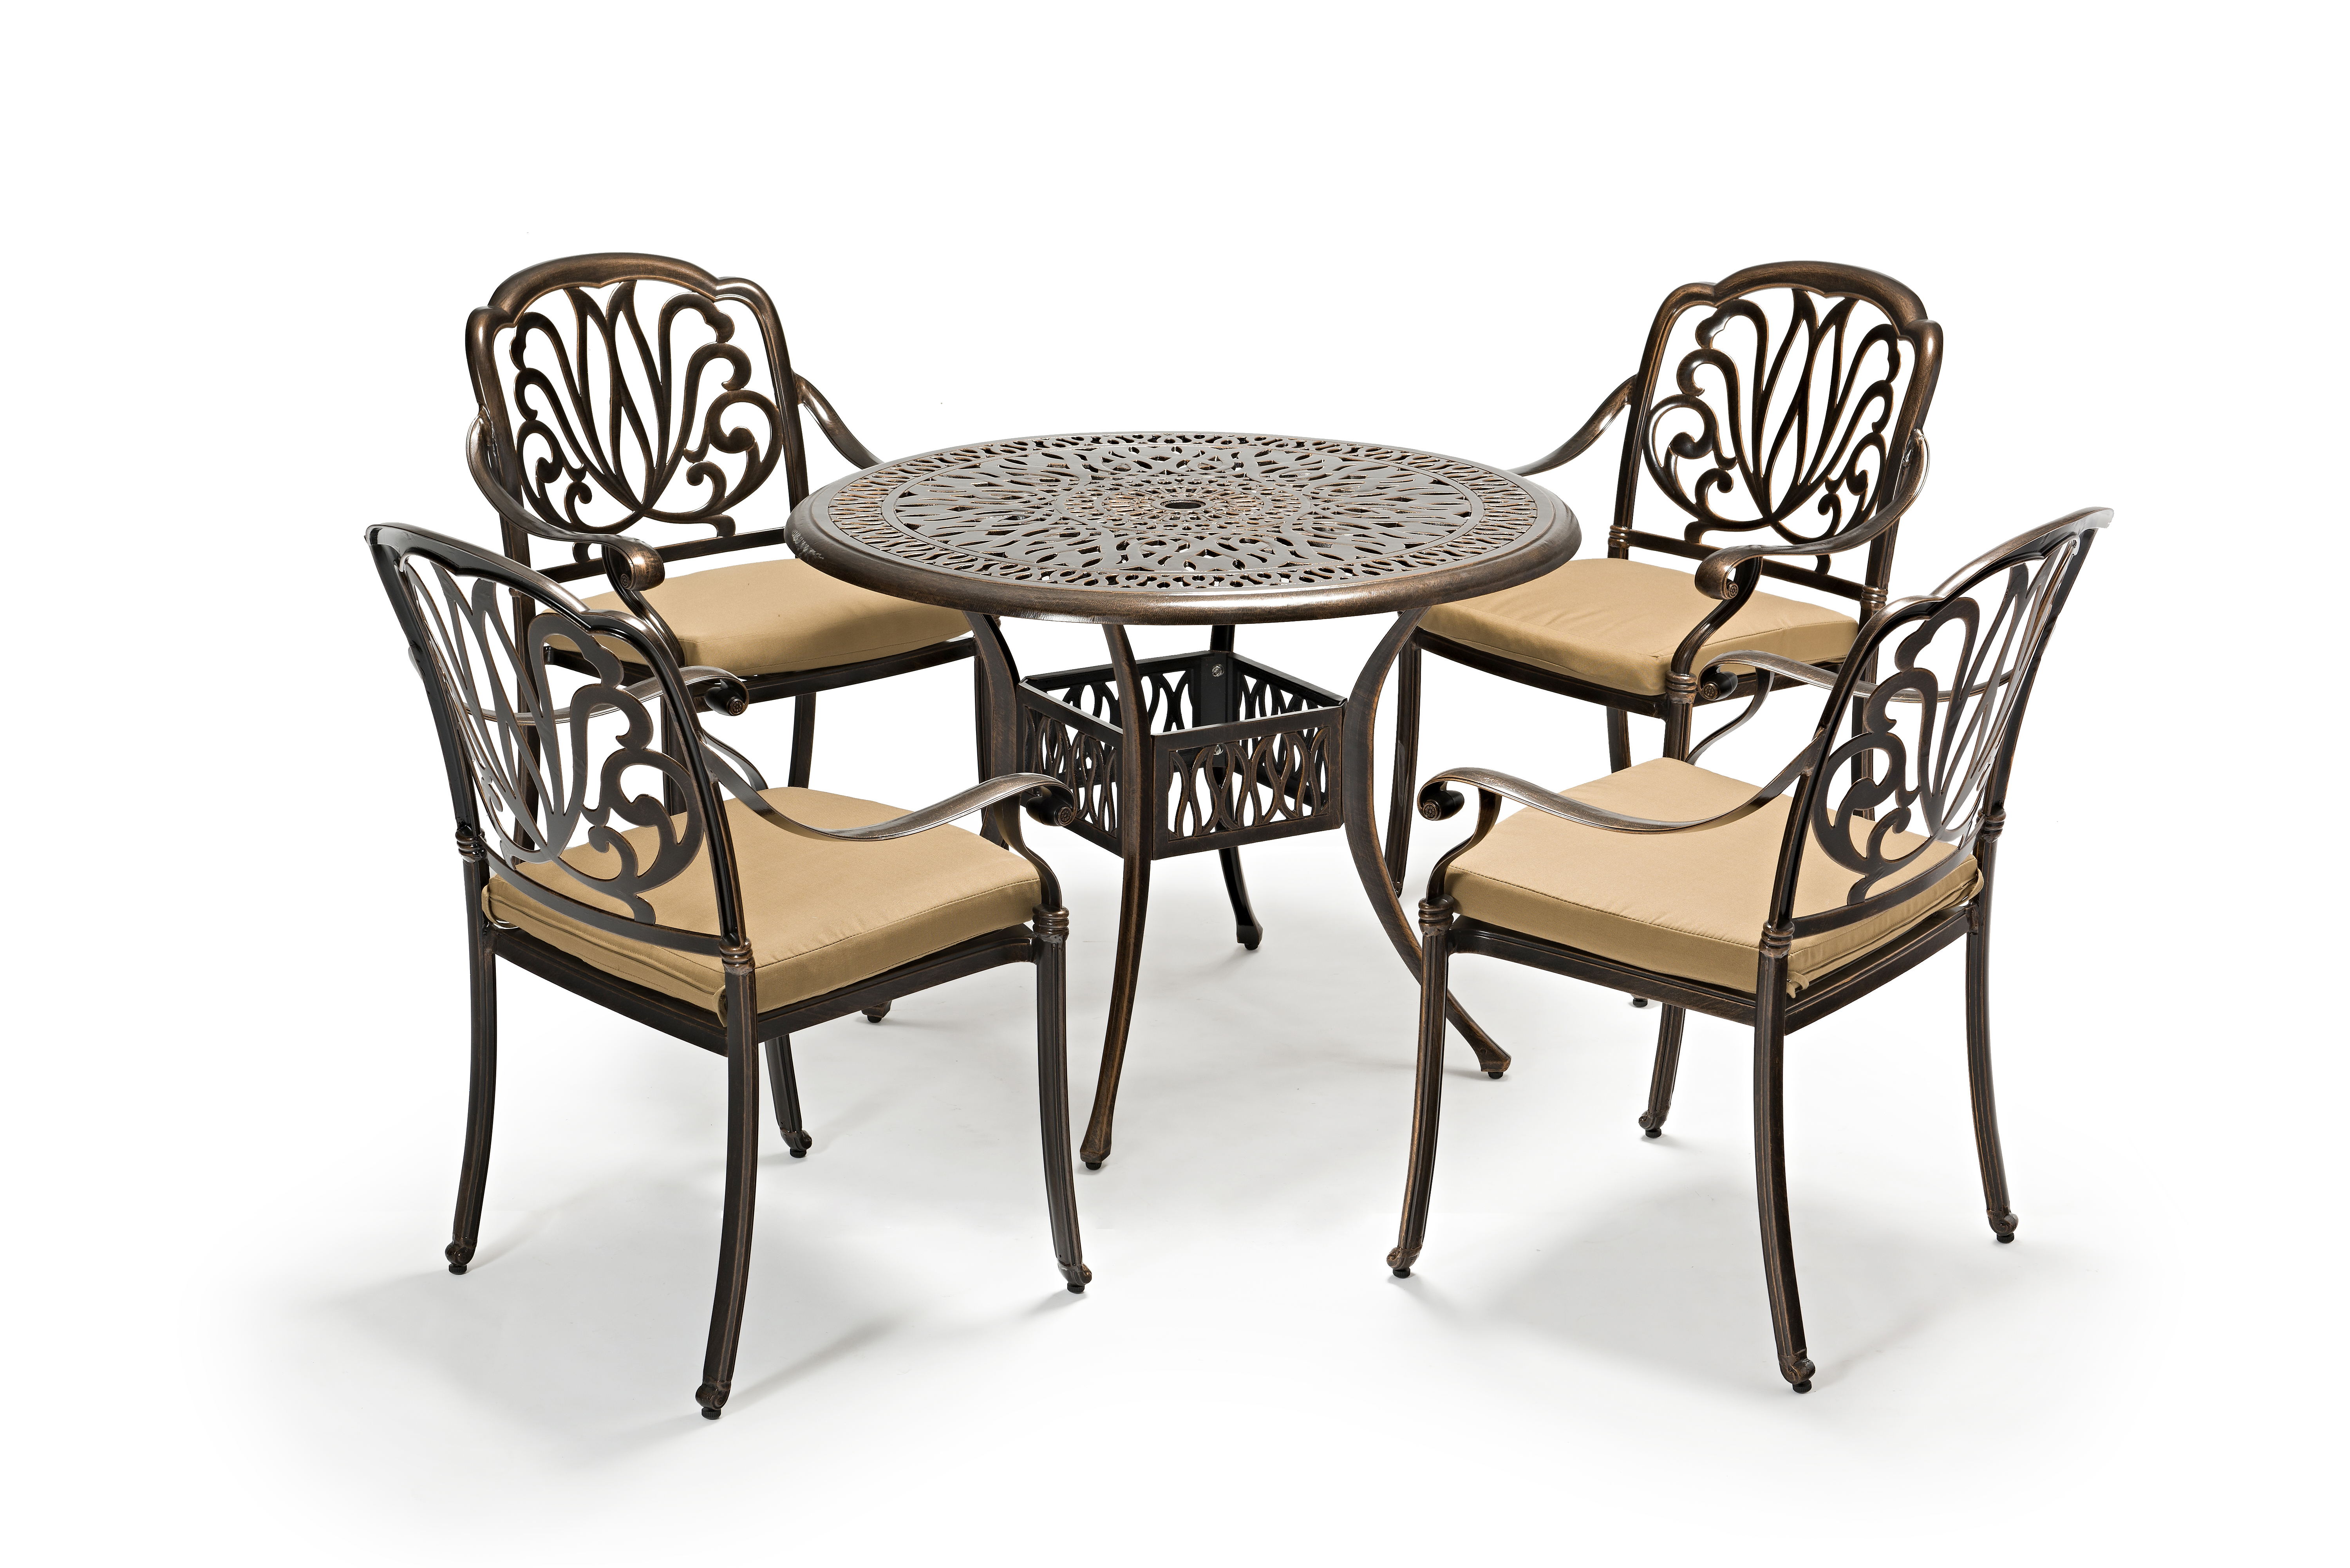 Uplion Modern patio garden poolside cast aluminum Table and chair